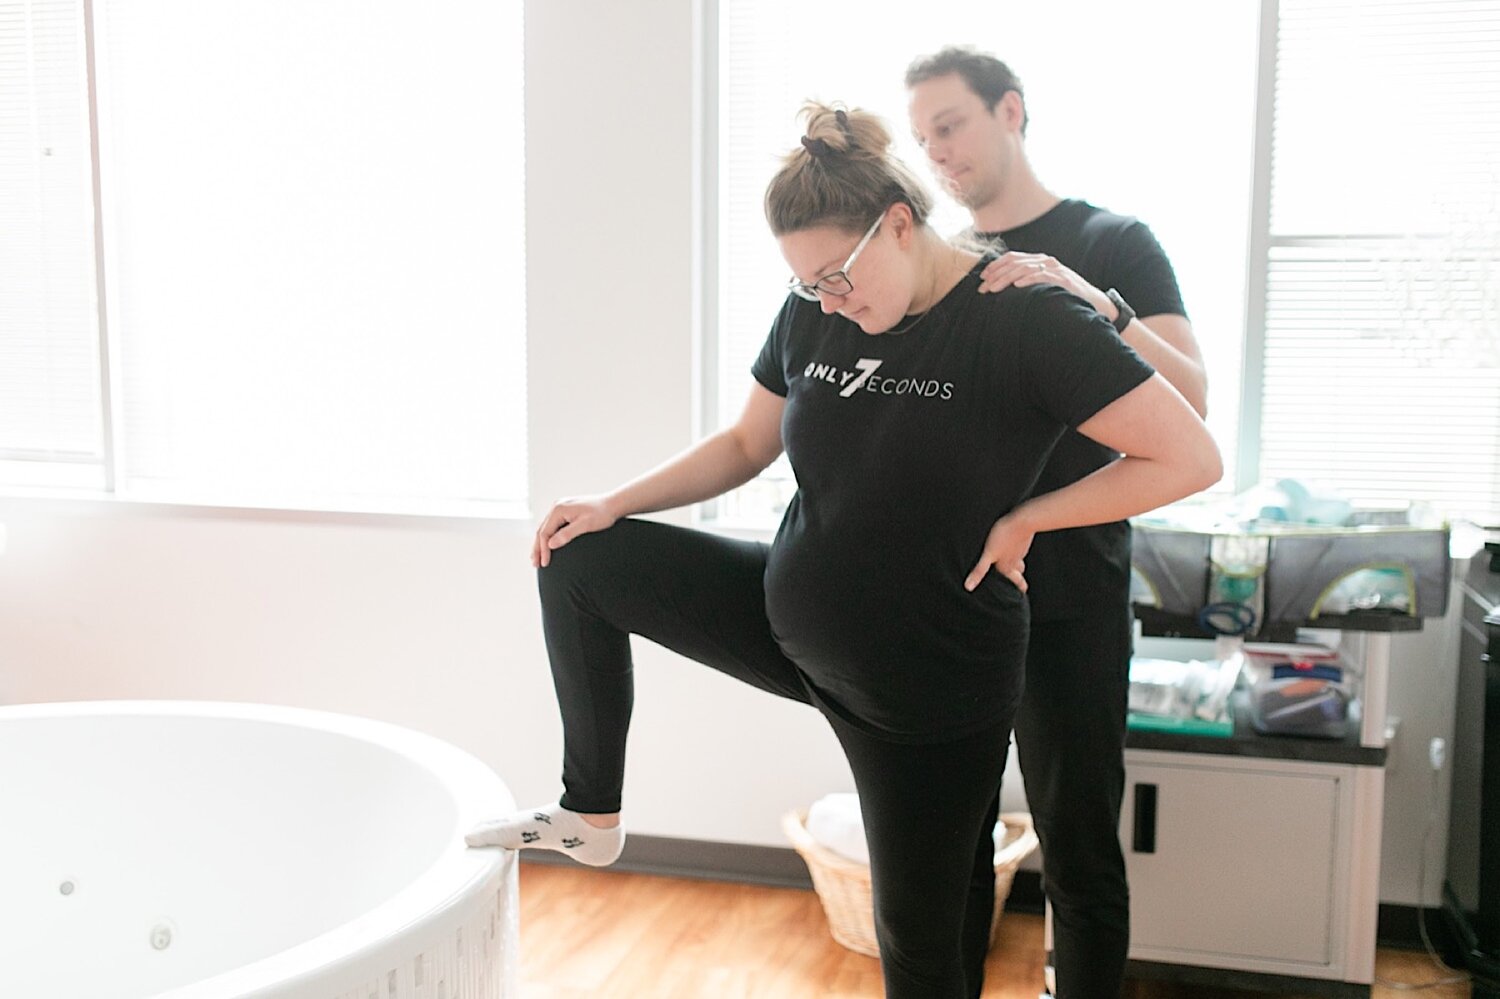 Justin making sure my shoulders stayed relaxed while I alternated lunging over the side of the tub to move baby lower.